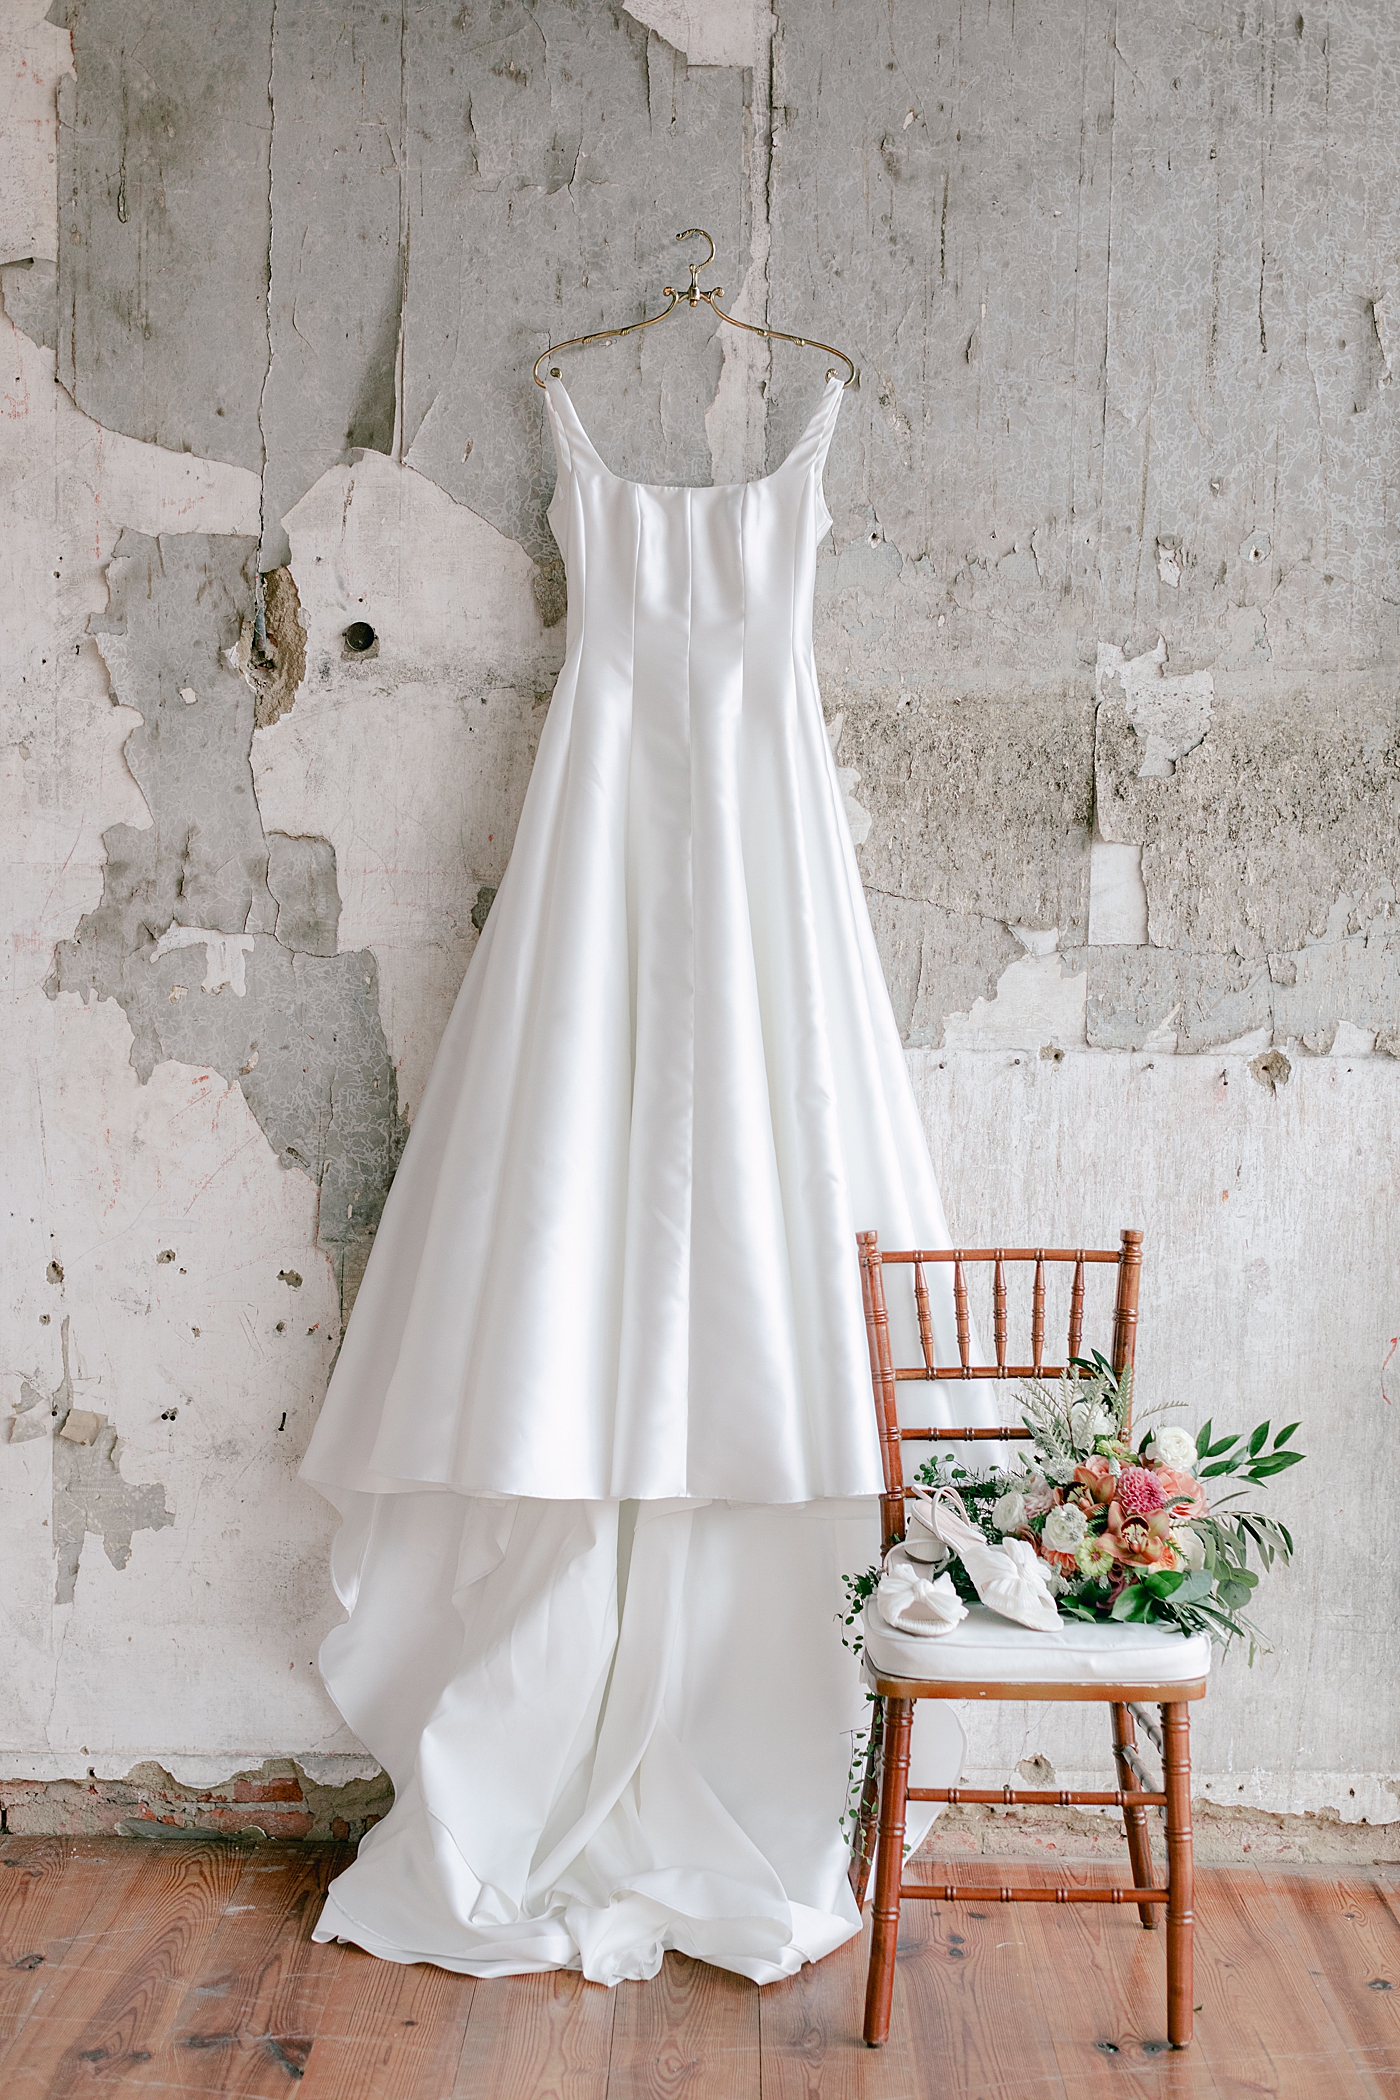 Bridal gown hanging from a gold hanger | Excelsior PA Wedding Photography by Hope Helmuth Photography